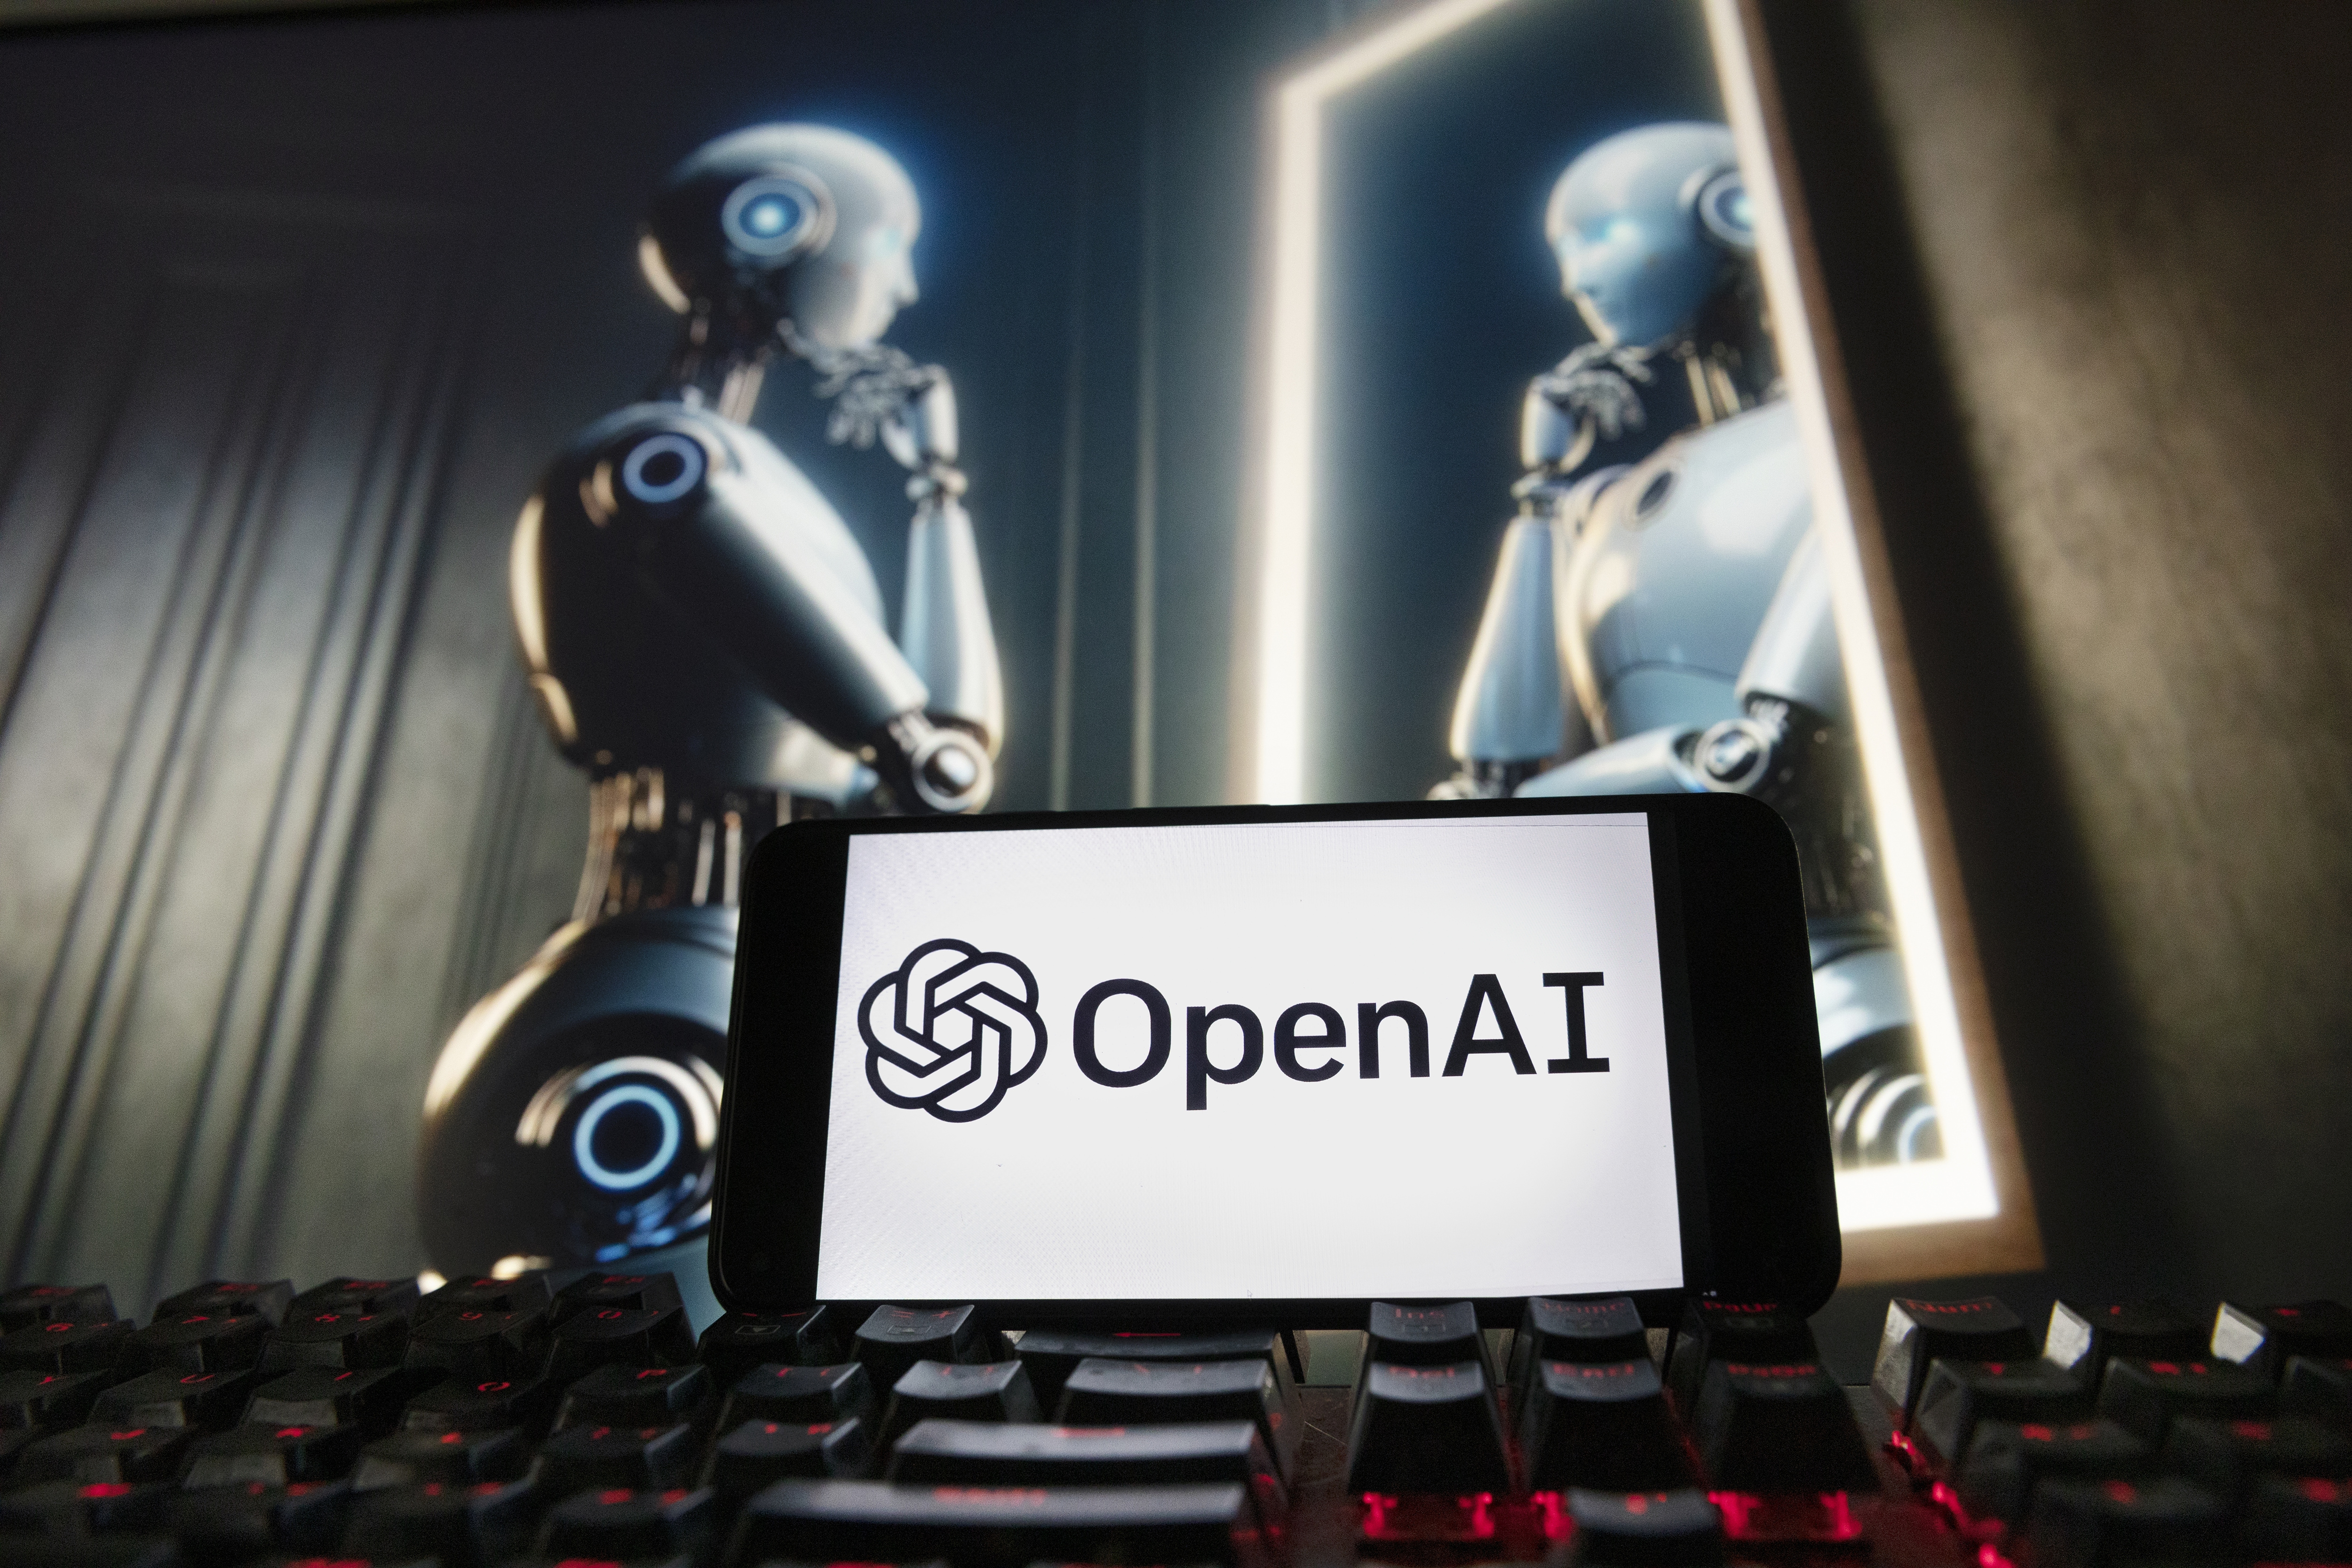 FILE- The OpenAI logo is displayed on a cell phone with an image on a computer monitor generated by ChatGPT's Dall-E text-to-image model, Dec. 8, 2023, in Boston. One of the original creators of the artificial intelligence technology behind ChatGPT says he is leaving the company after a nearly decade. OpenAI cofounder Ilya Sutskever announced his decision on the social media site X on Tuesday, May 14, 2024. Sutskever will be replaced by Jakub Pachocki as chief scientist at OpenAI. (AP Photo/Michael Dwyer, File)